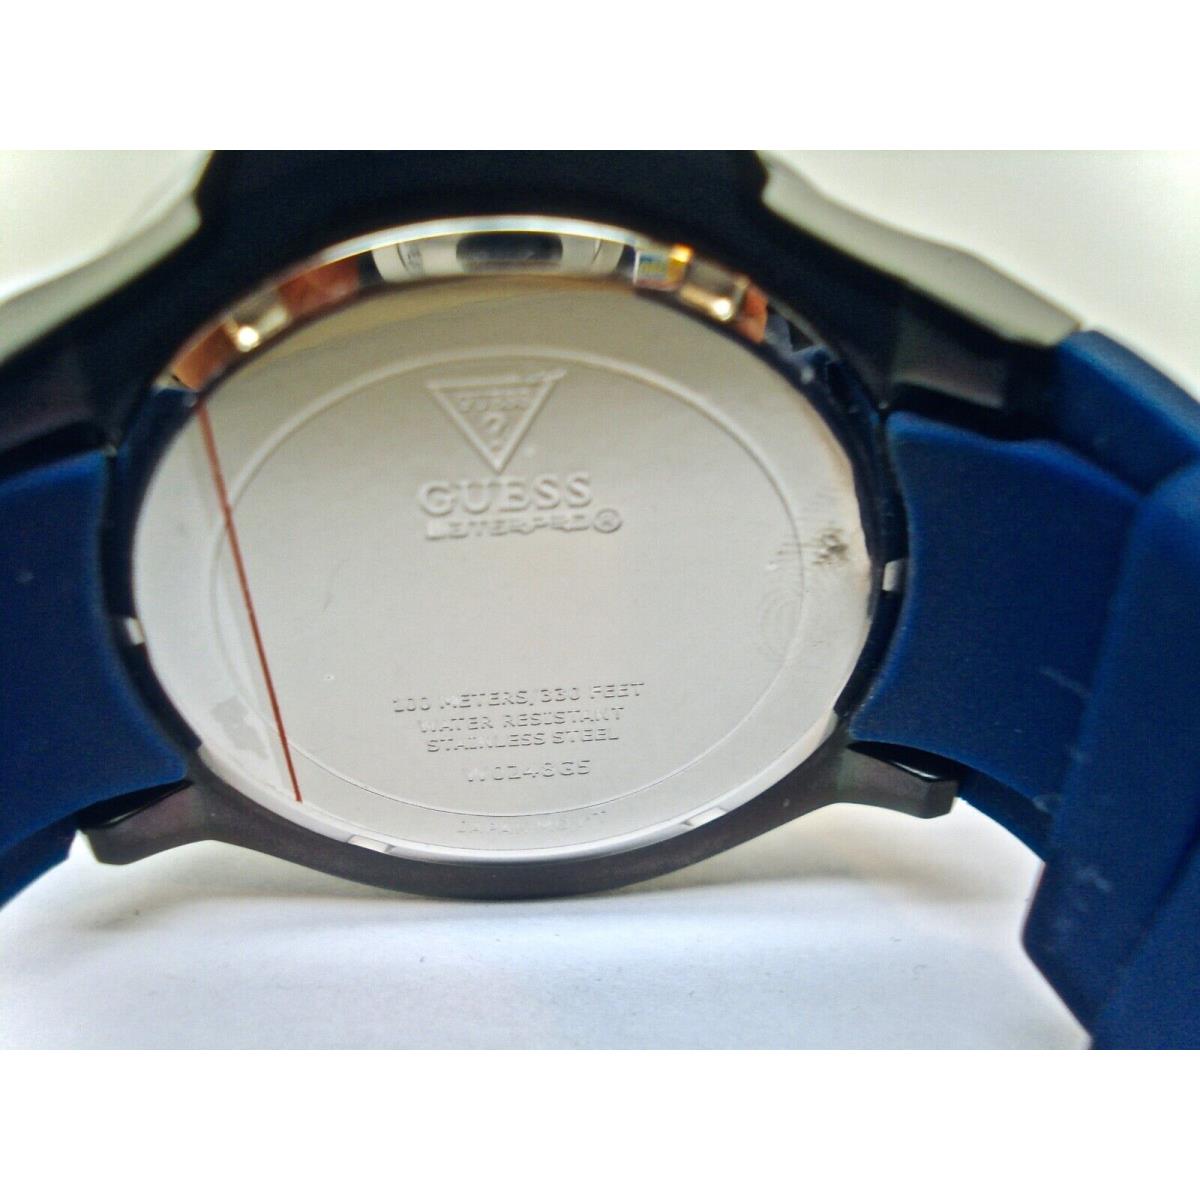 Guess watch  - Blue Face, Blue Dial, Blue Band